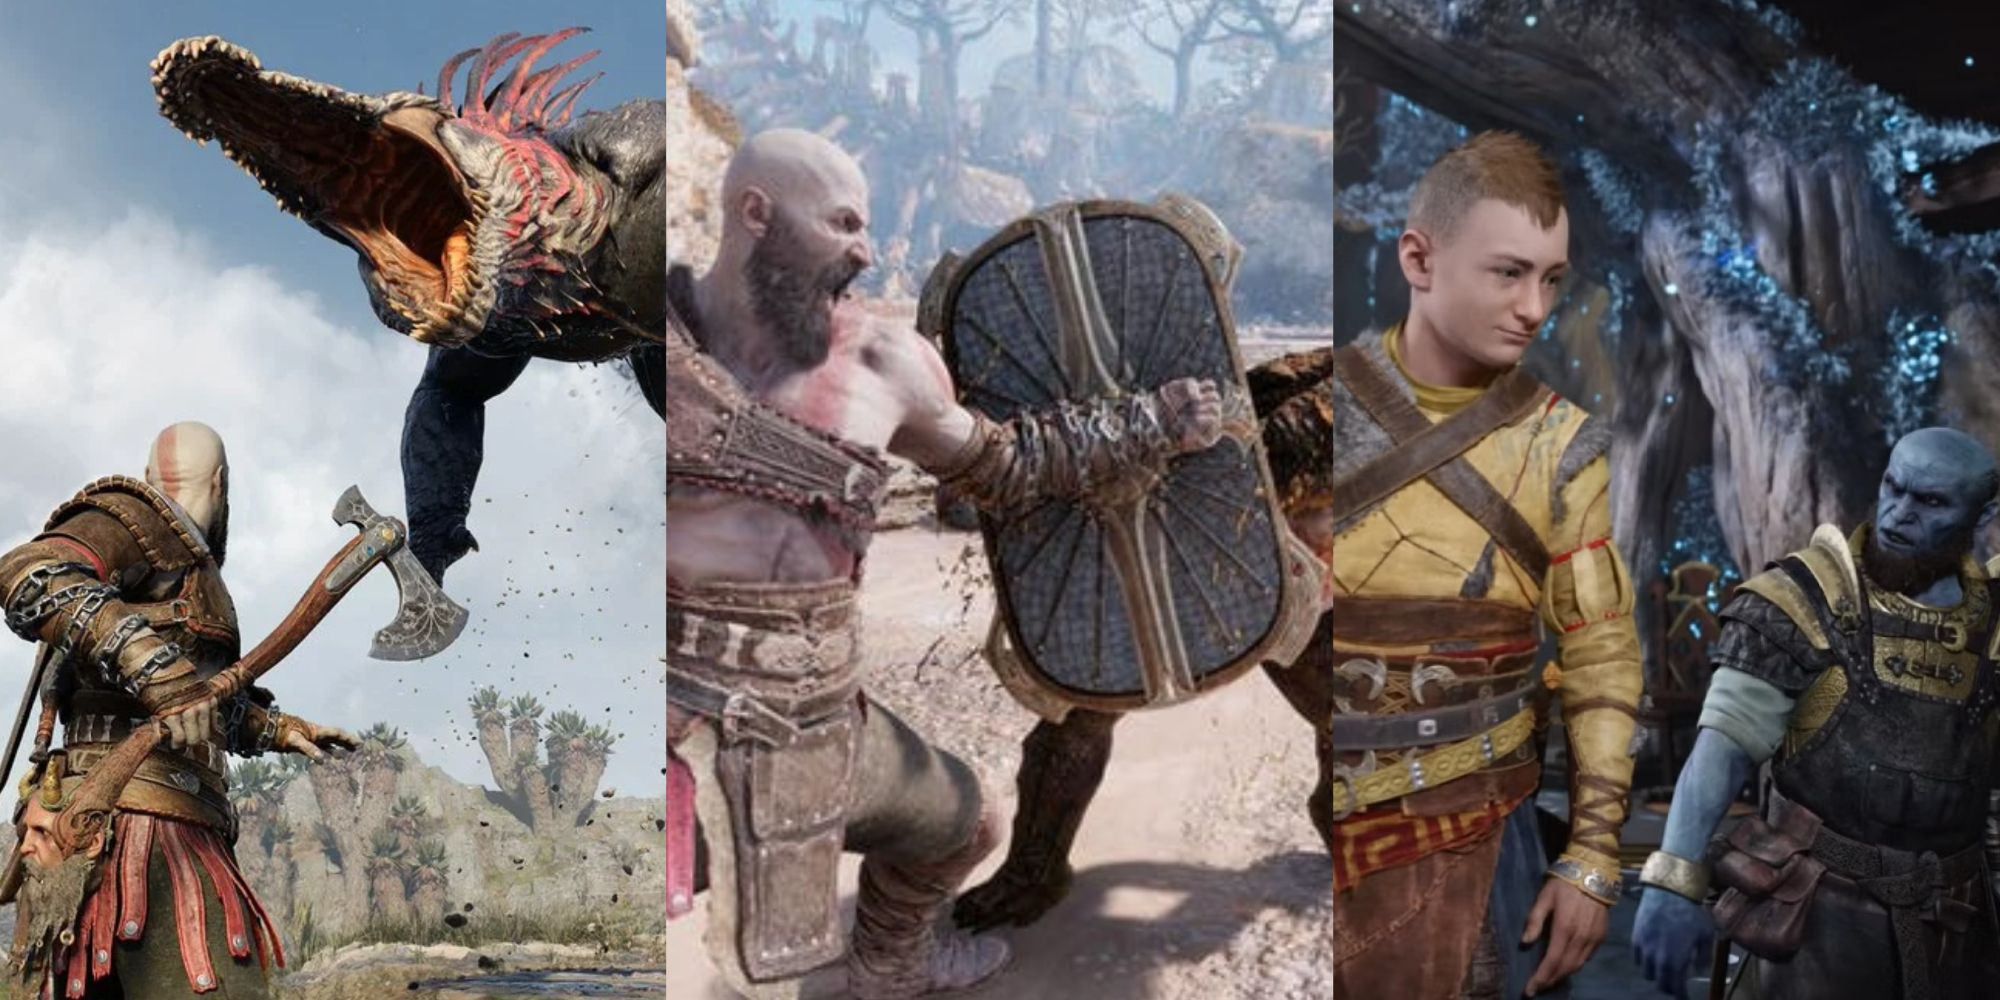 God Of War Ragnarök: 10 Most Unpopular Opinions About The Game, According To Reddit